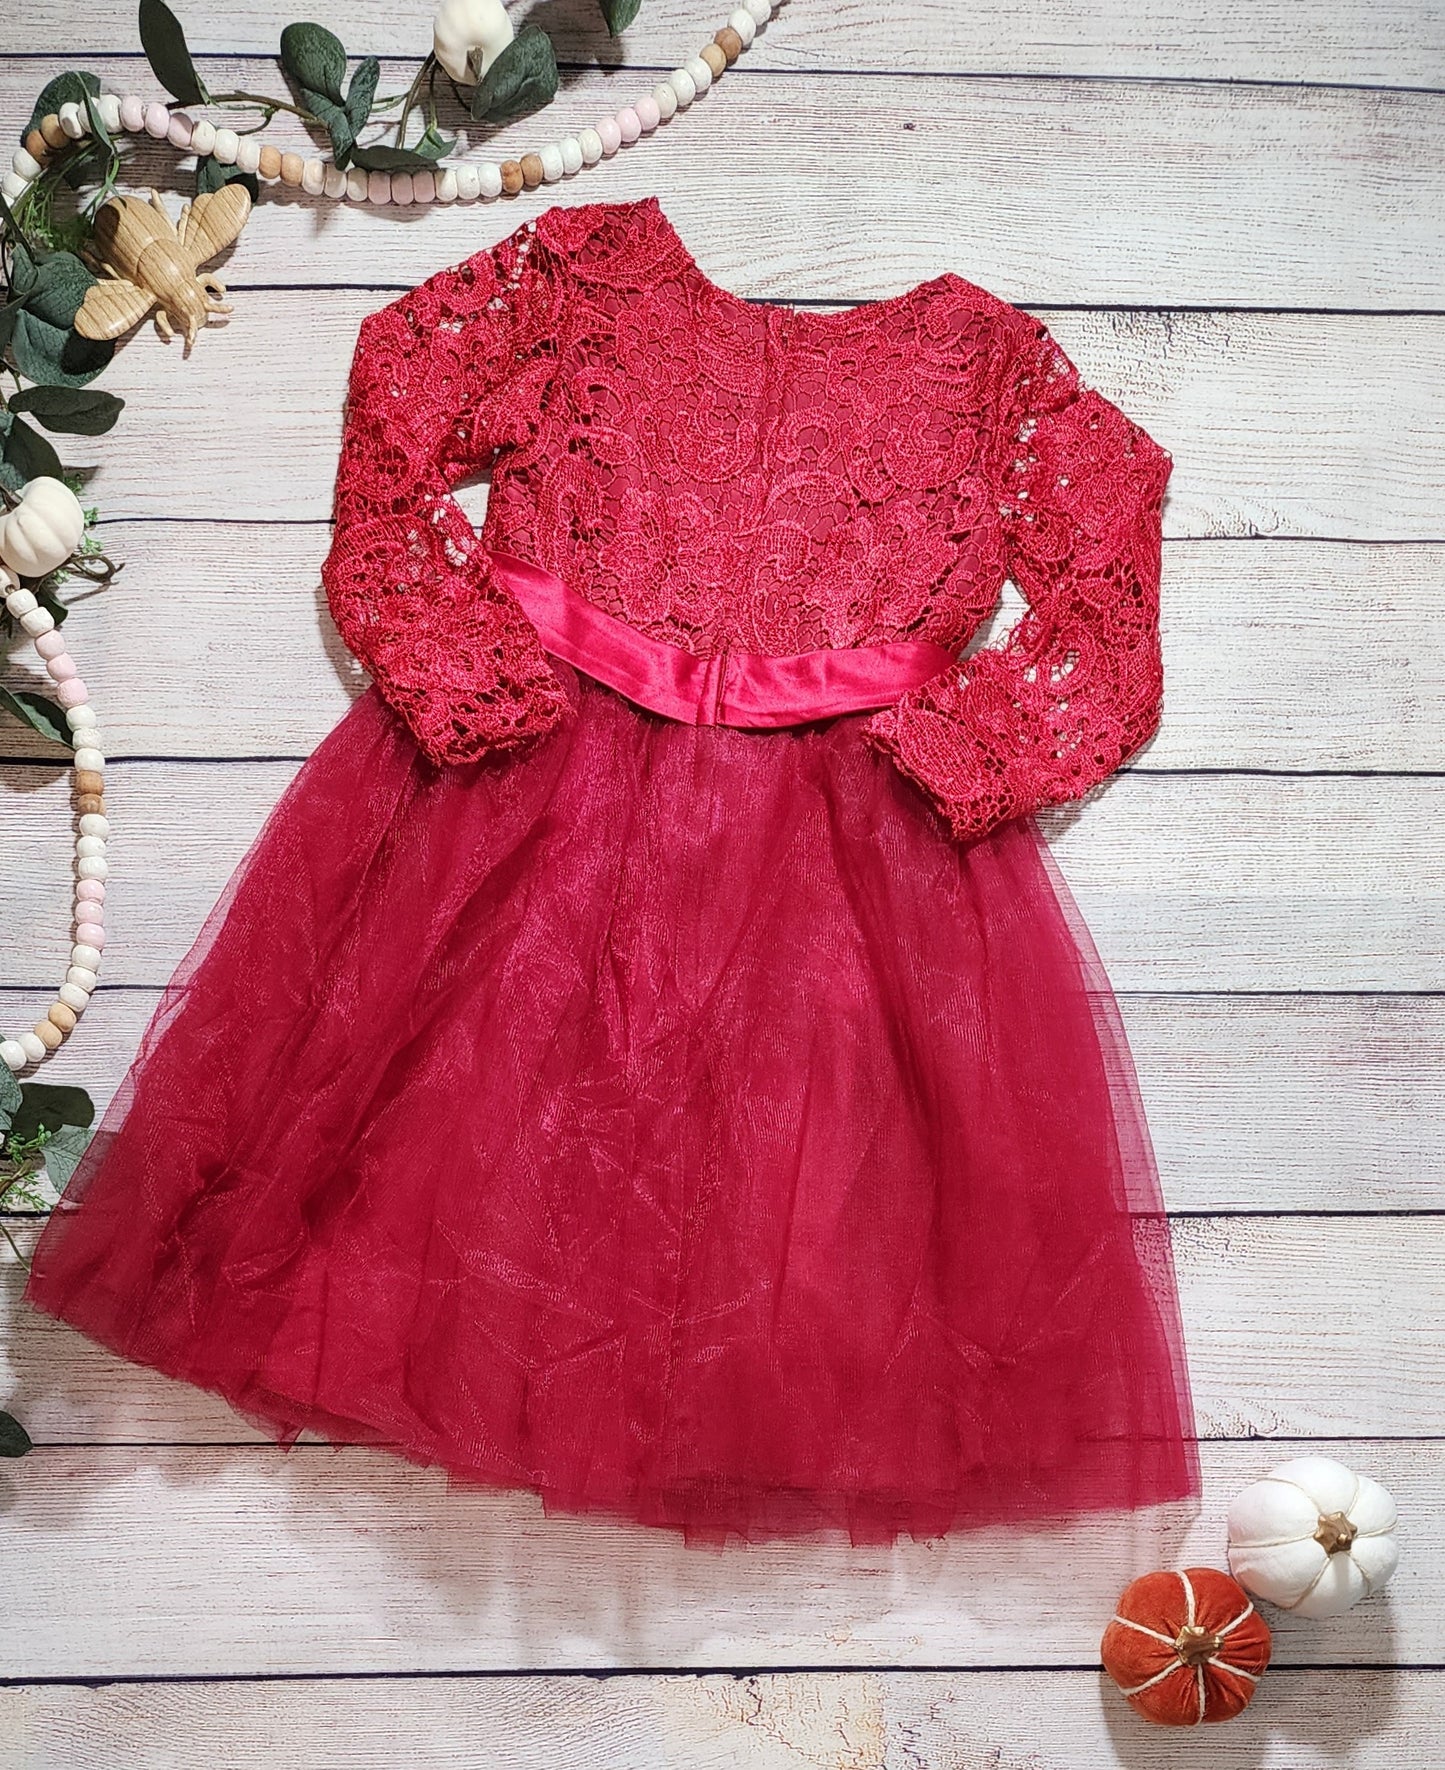 Red Lace Sleeved Dress, Size 6/7